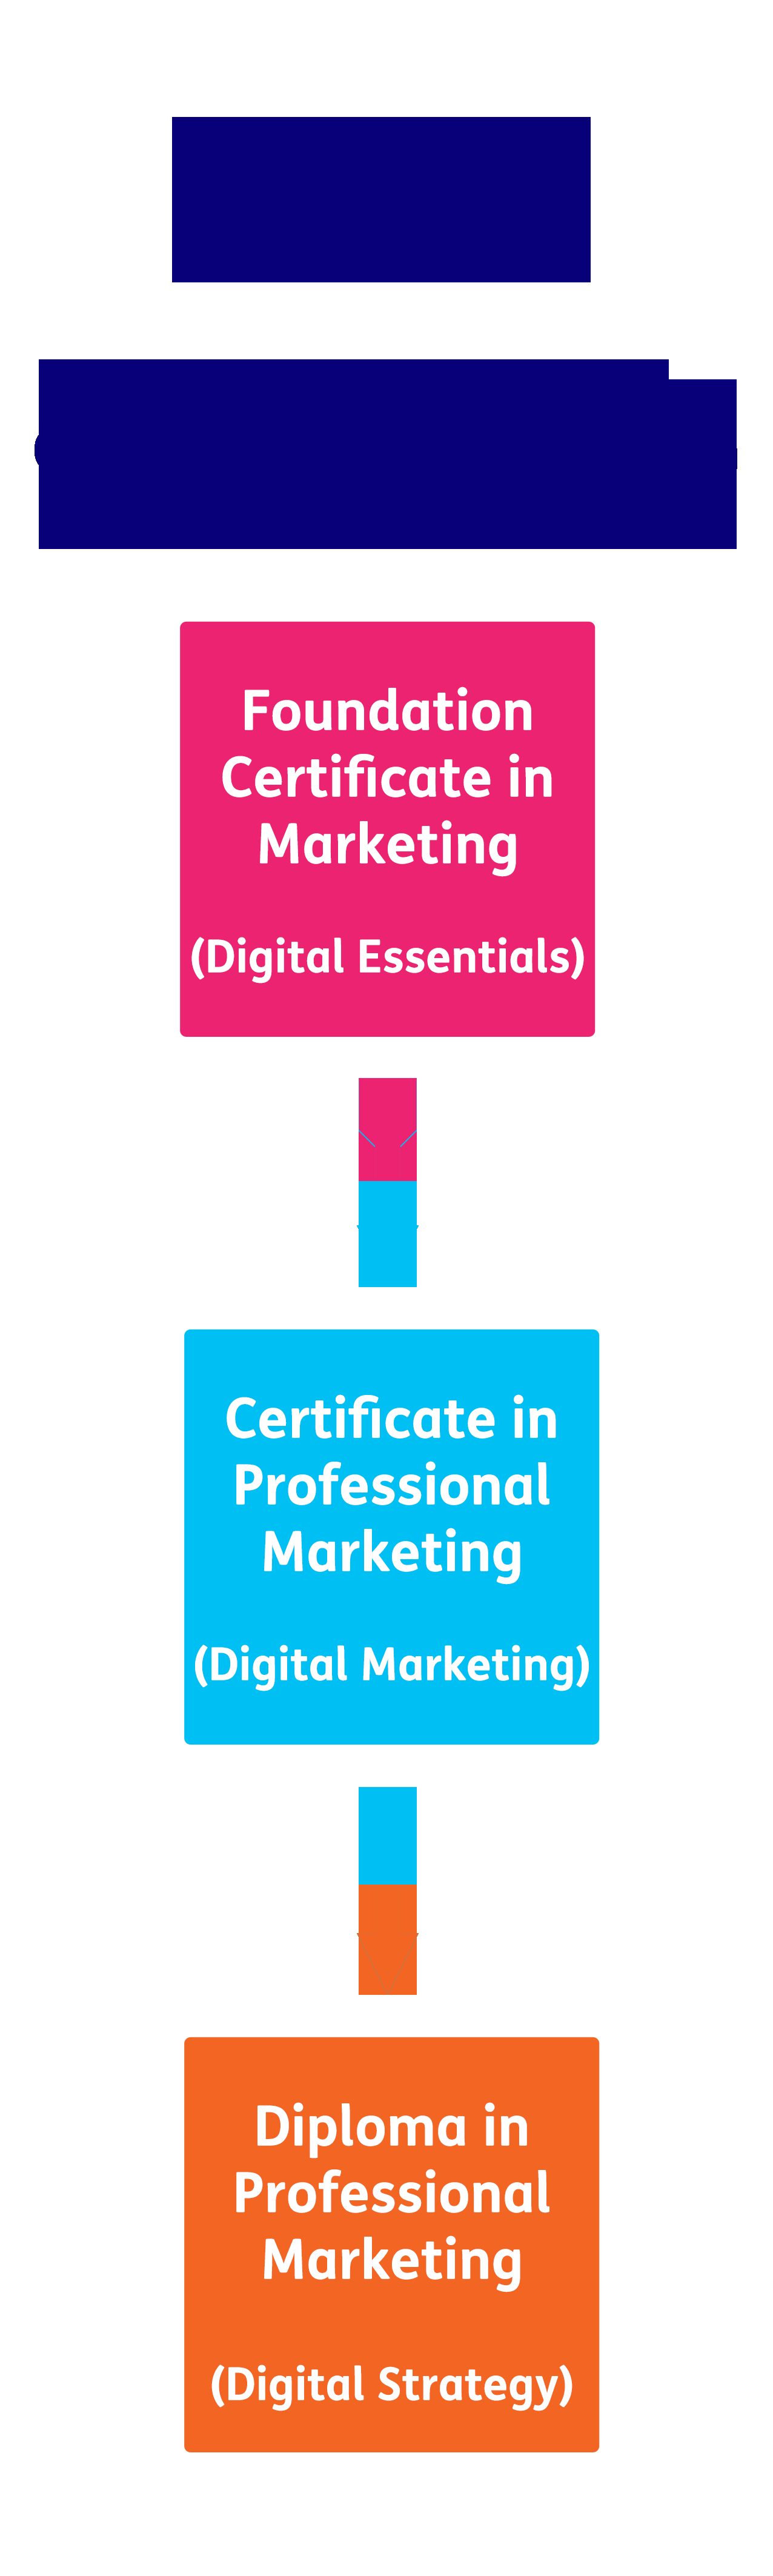 Cim Digital Marketing Courses Integration Is The Key To Success As for sizing 1276 X 4251